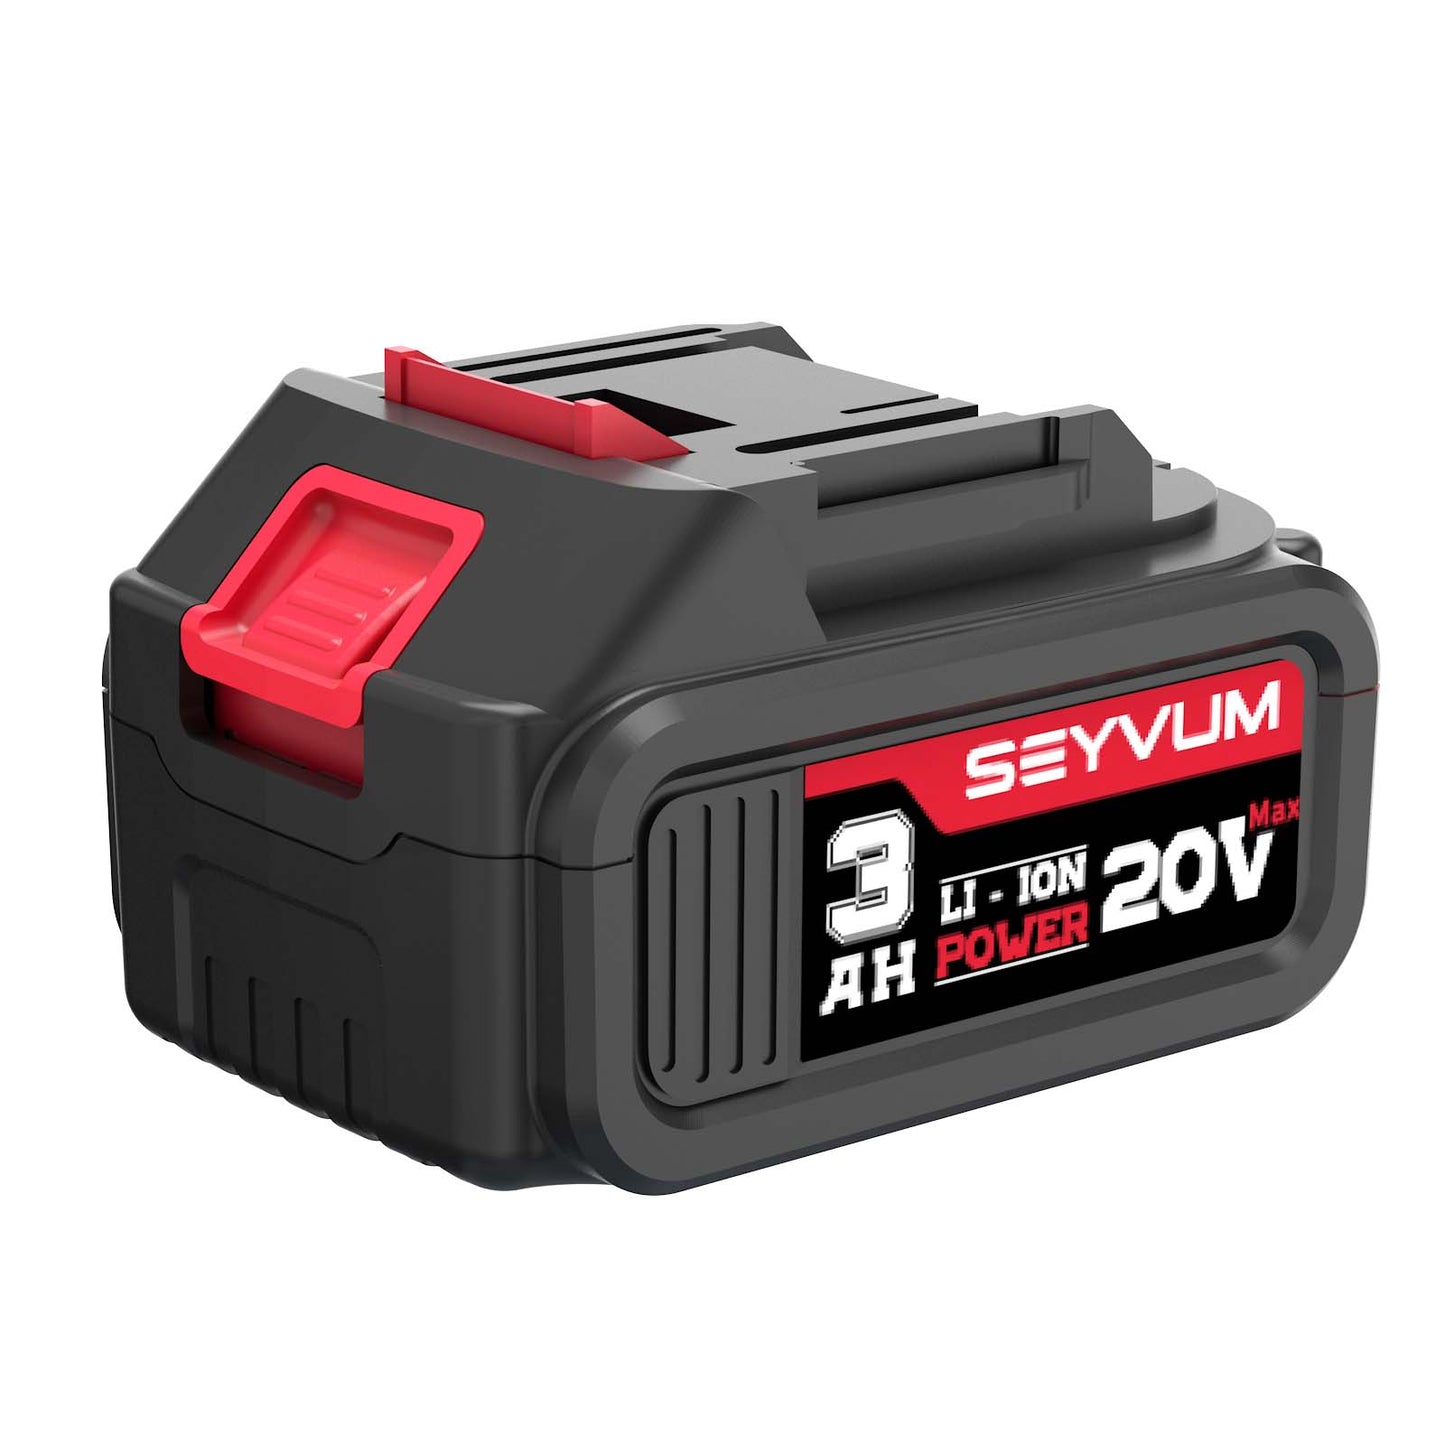 3.0 Ah Lithium-Ion Battery for 20V Cordless Impact Wrench